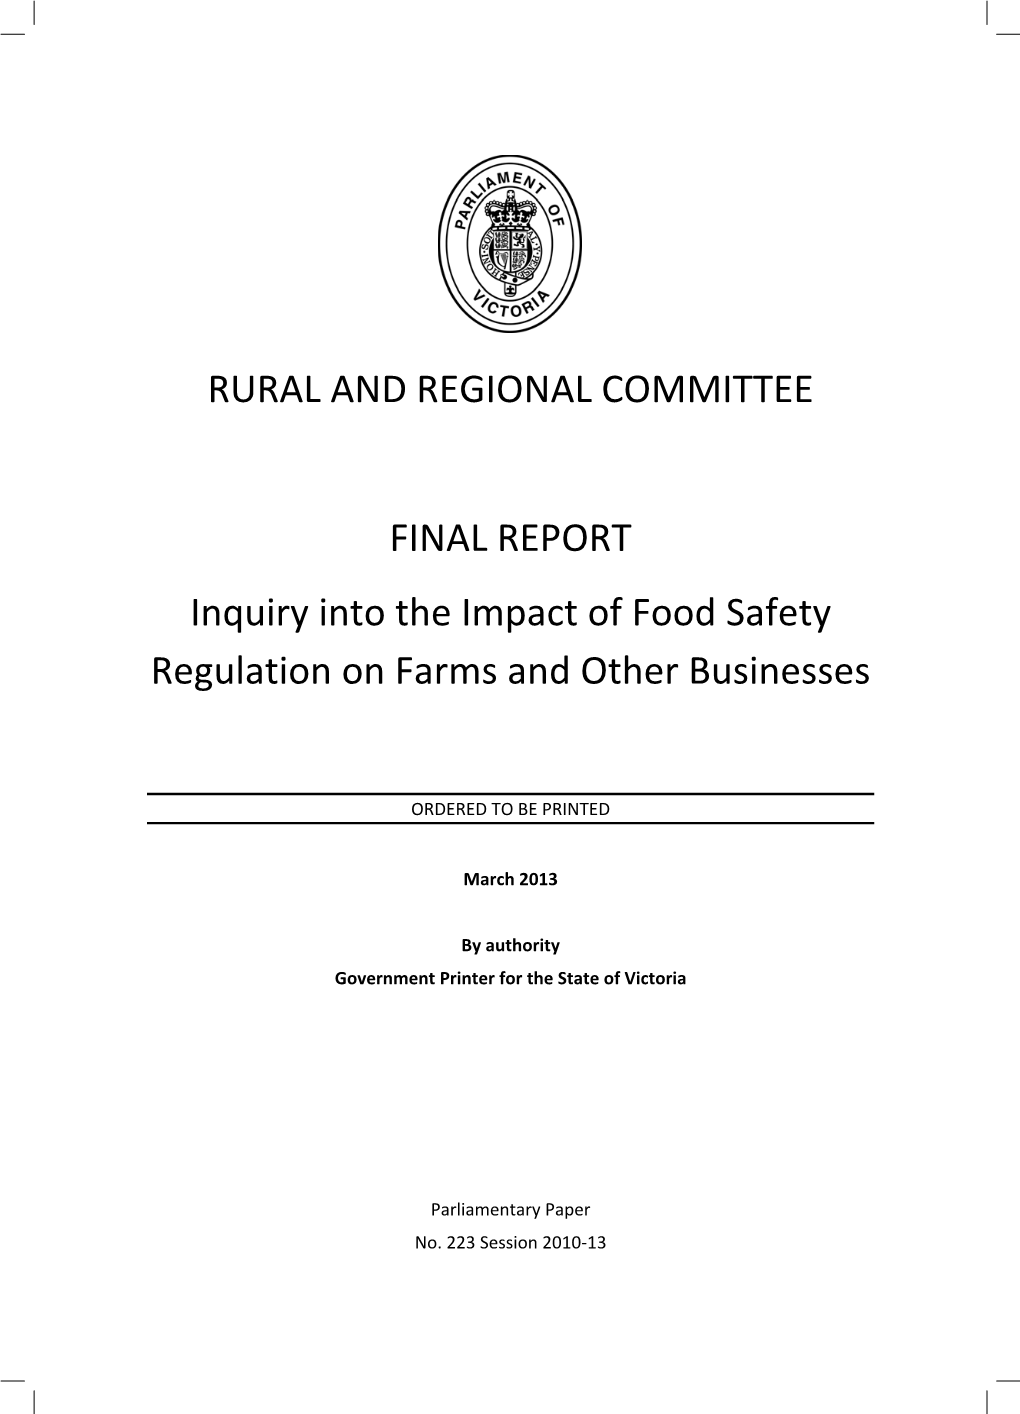 RRC Inquiry Into Impact of Food Safety Regulation